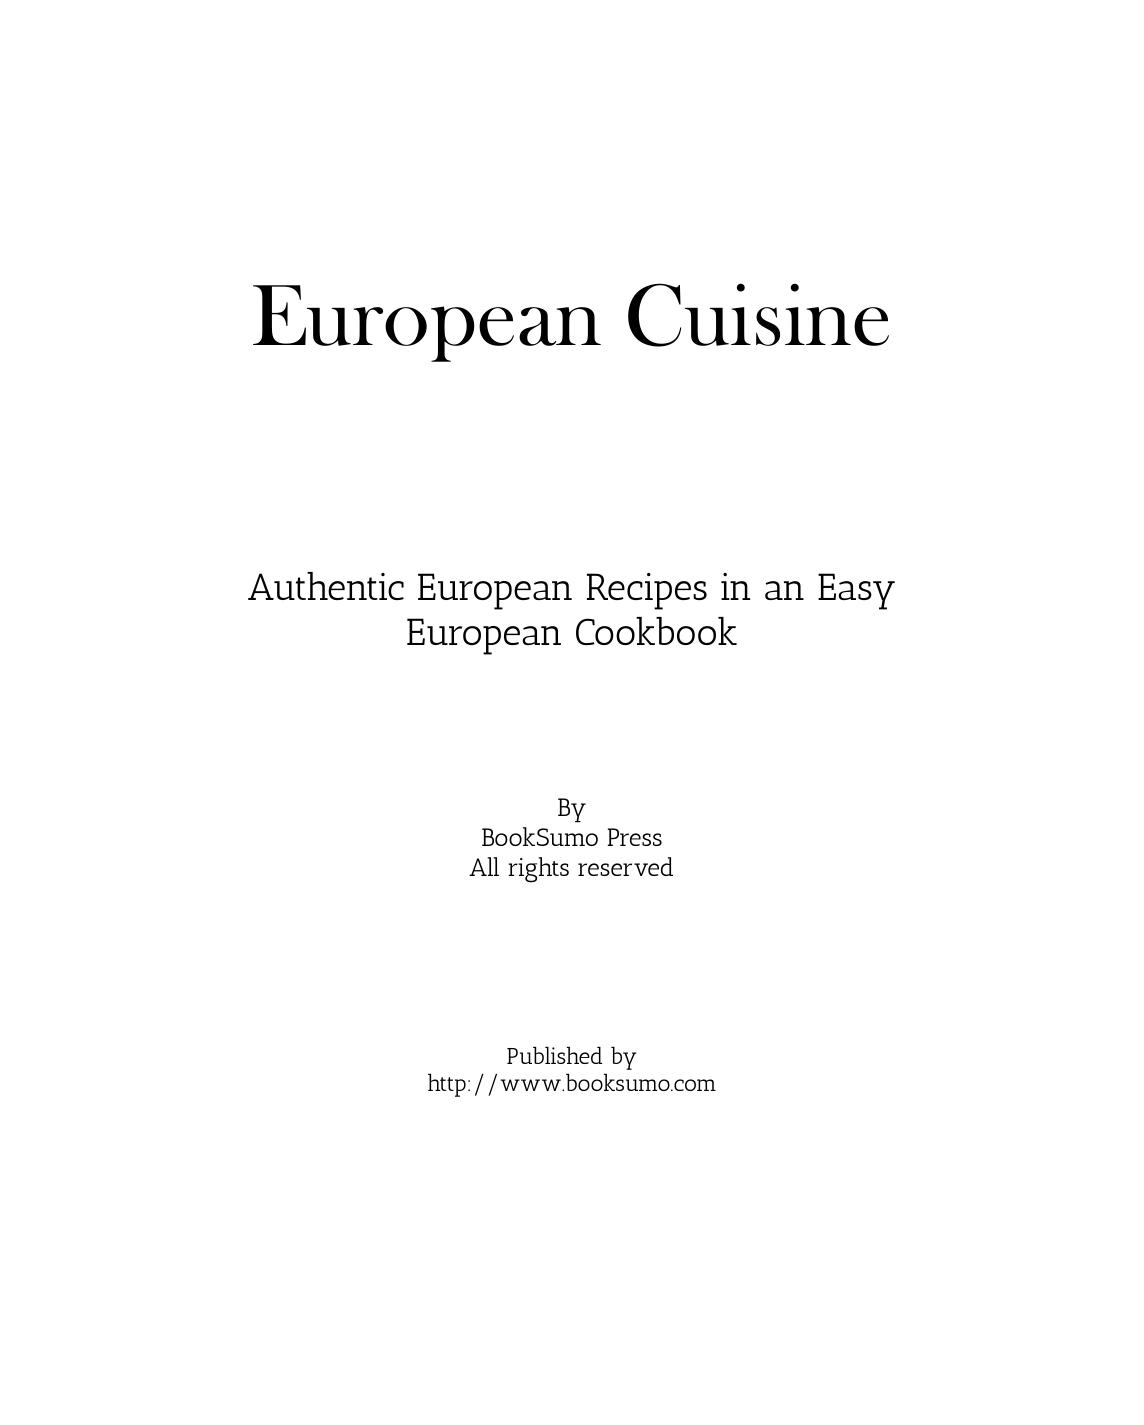 European Cuisine: Authentic Ethnic Recipes in an Easy European Cookbook by BookSumo Press